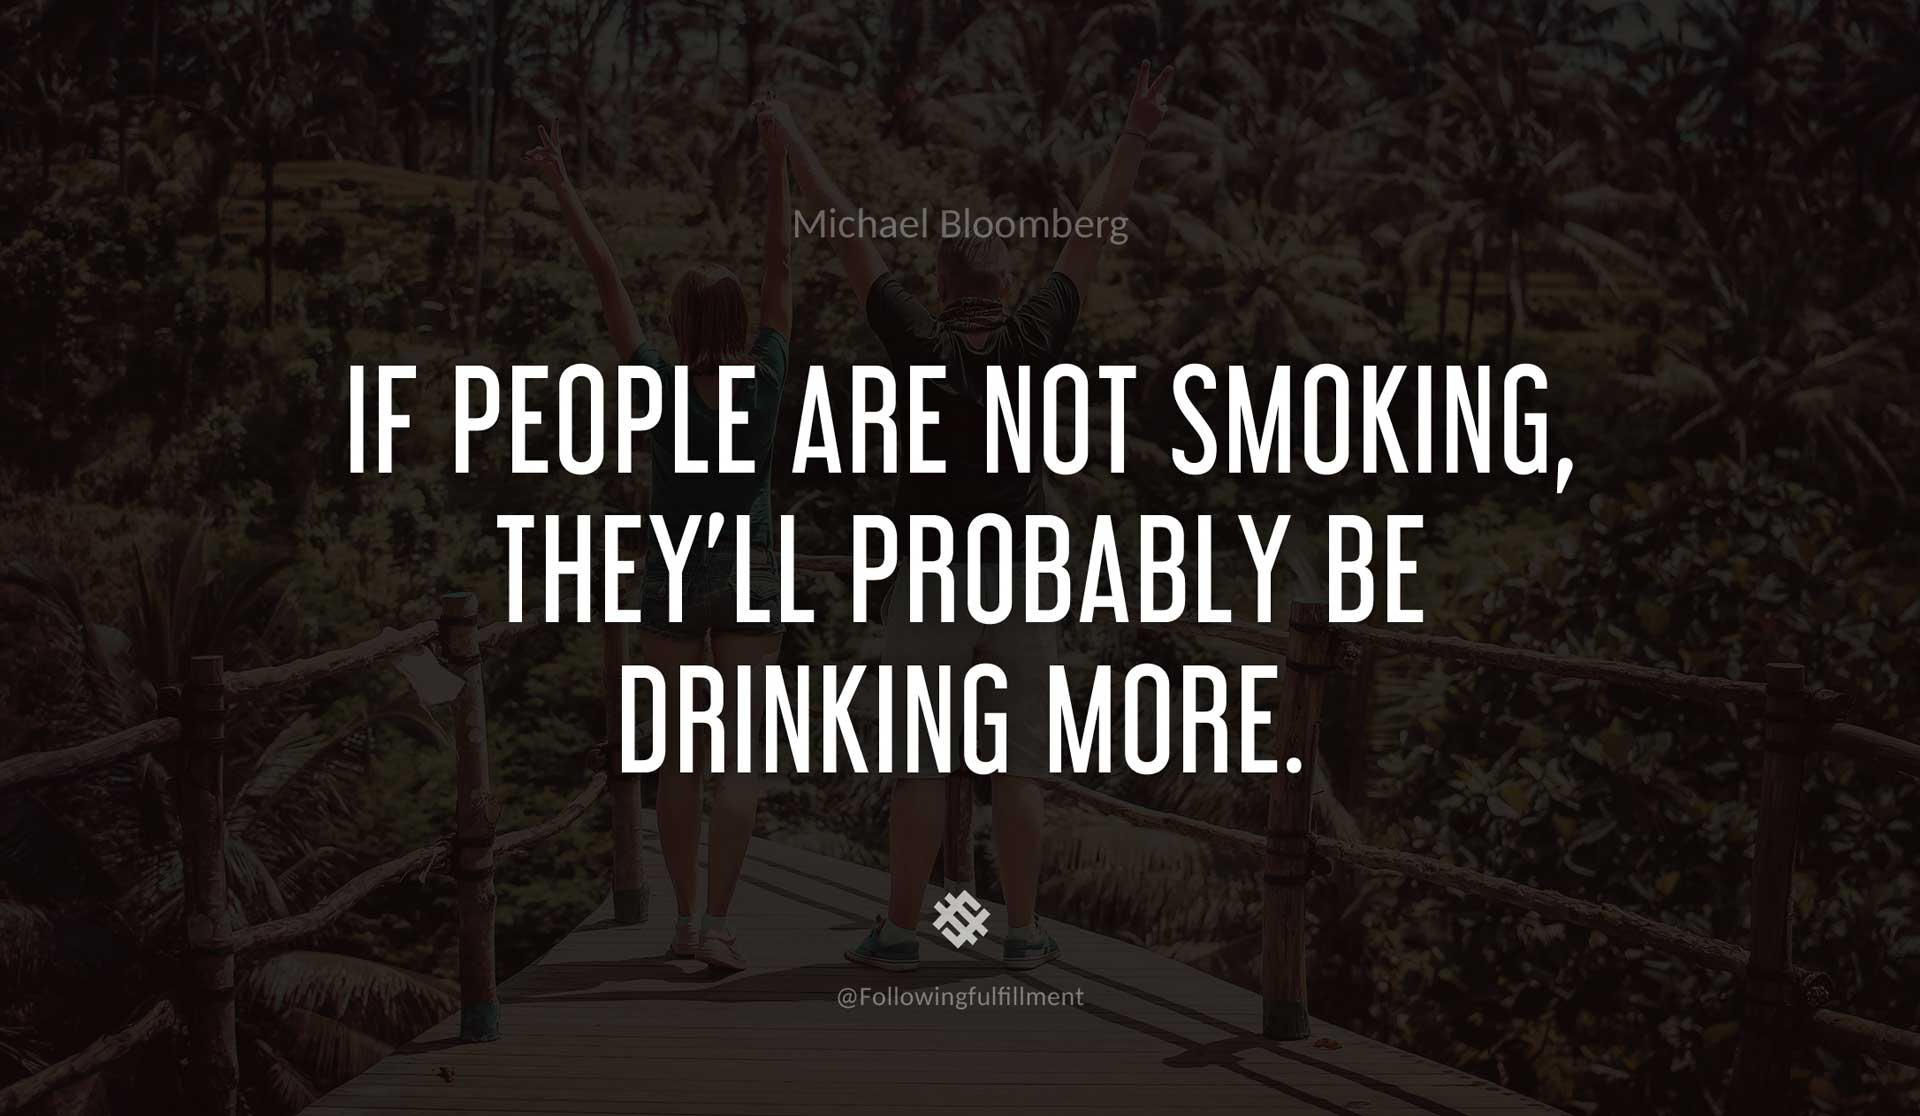 If-people-are-not-smoking,-they'll-probably-be-drinking-more.-MICHAEL-BLOOMBERG-Quote.jpg